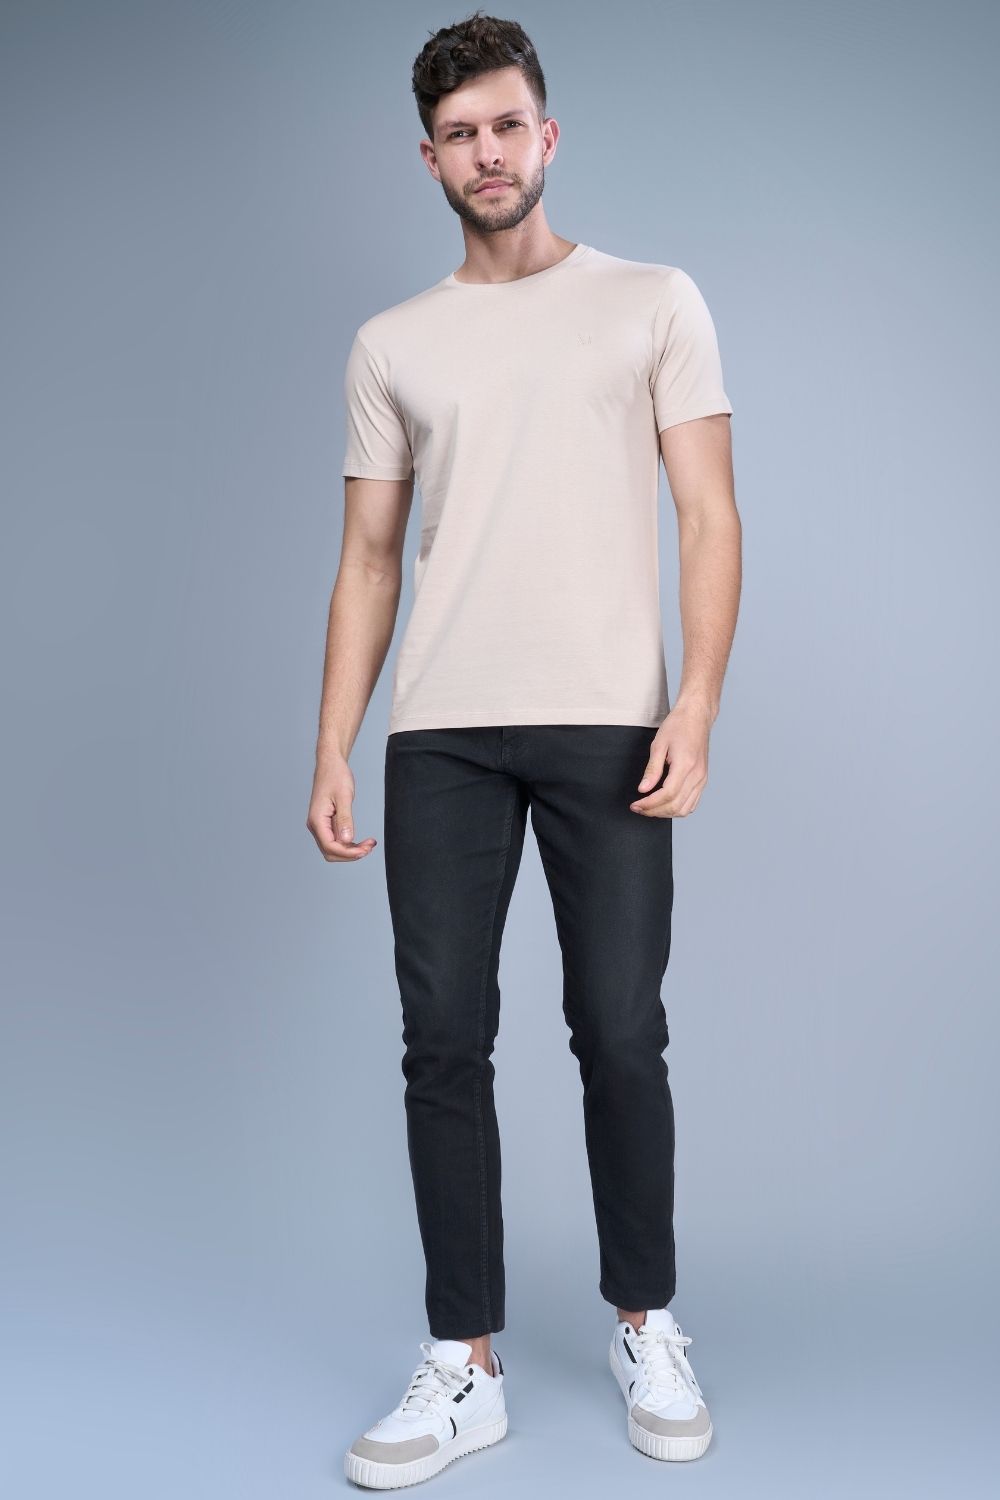 Solid T shirt for men in the color moon light with half sleeves and round neck, front view.